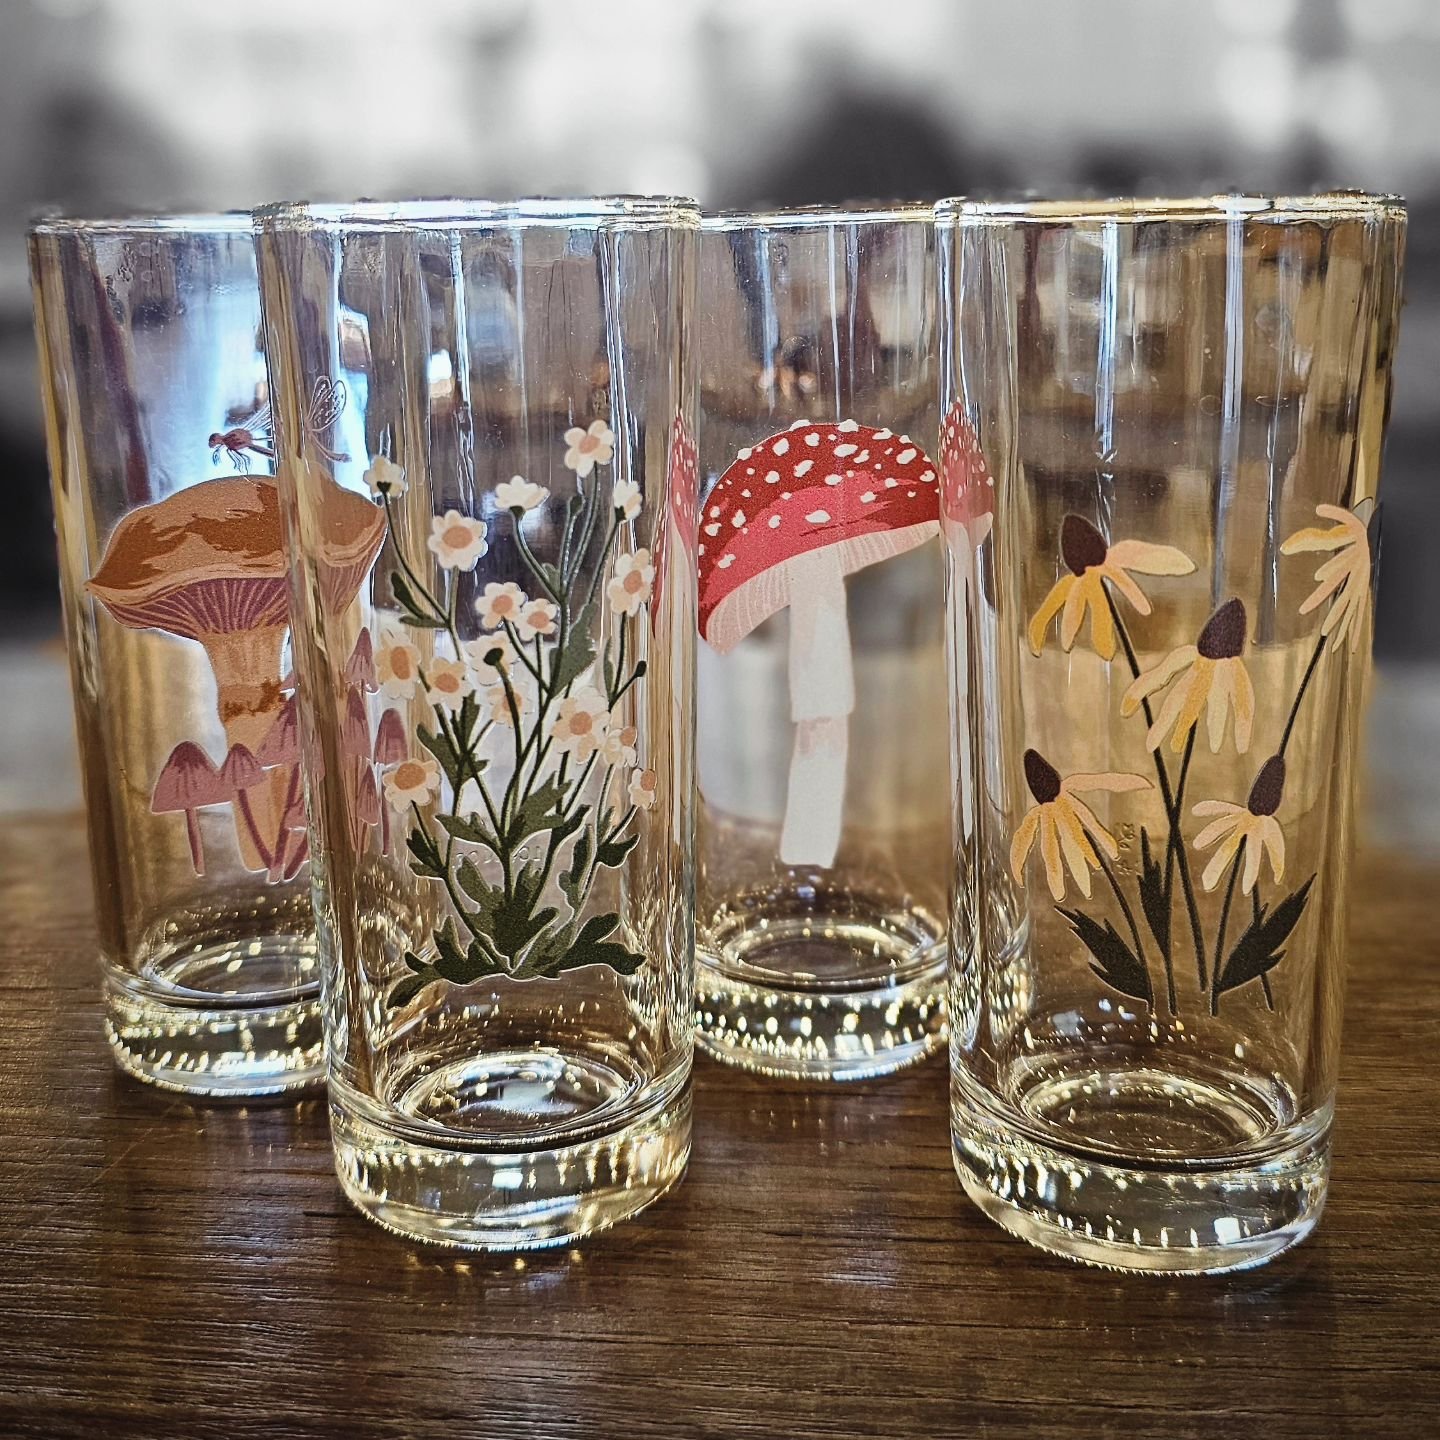 1Canoe2......roadside blooms tall juice glass set.....all women owned....Bowling Green, KY.....for those that don't know I was raised in KY.....but born in Wyoming.....so much new this week.....

#1canoe2 #thatswyoming #kentucky #wyoming #smallbusine